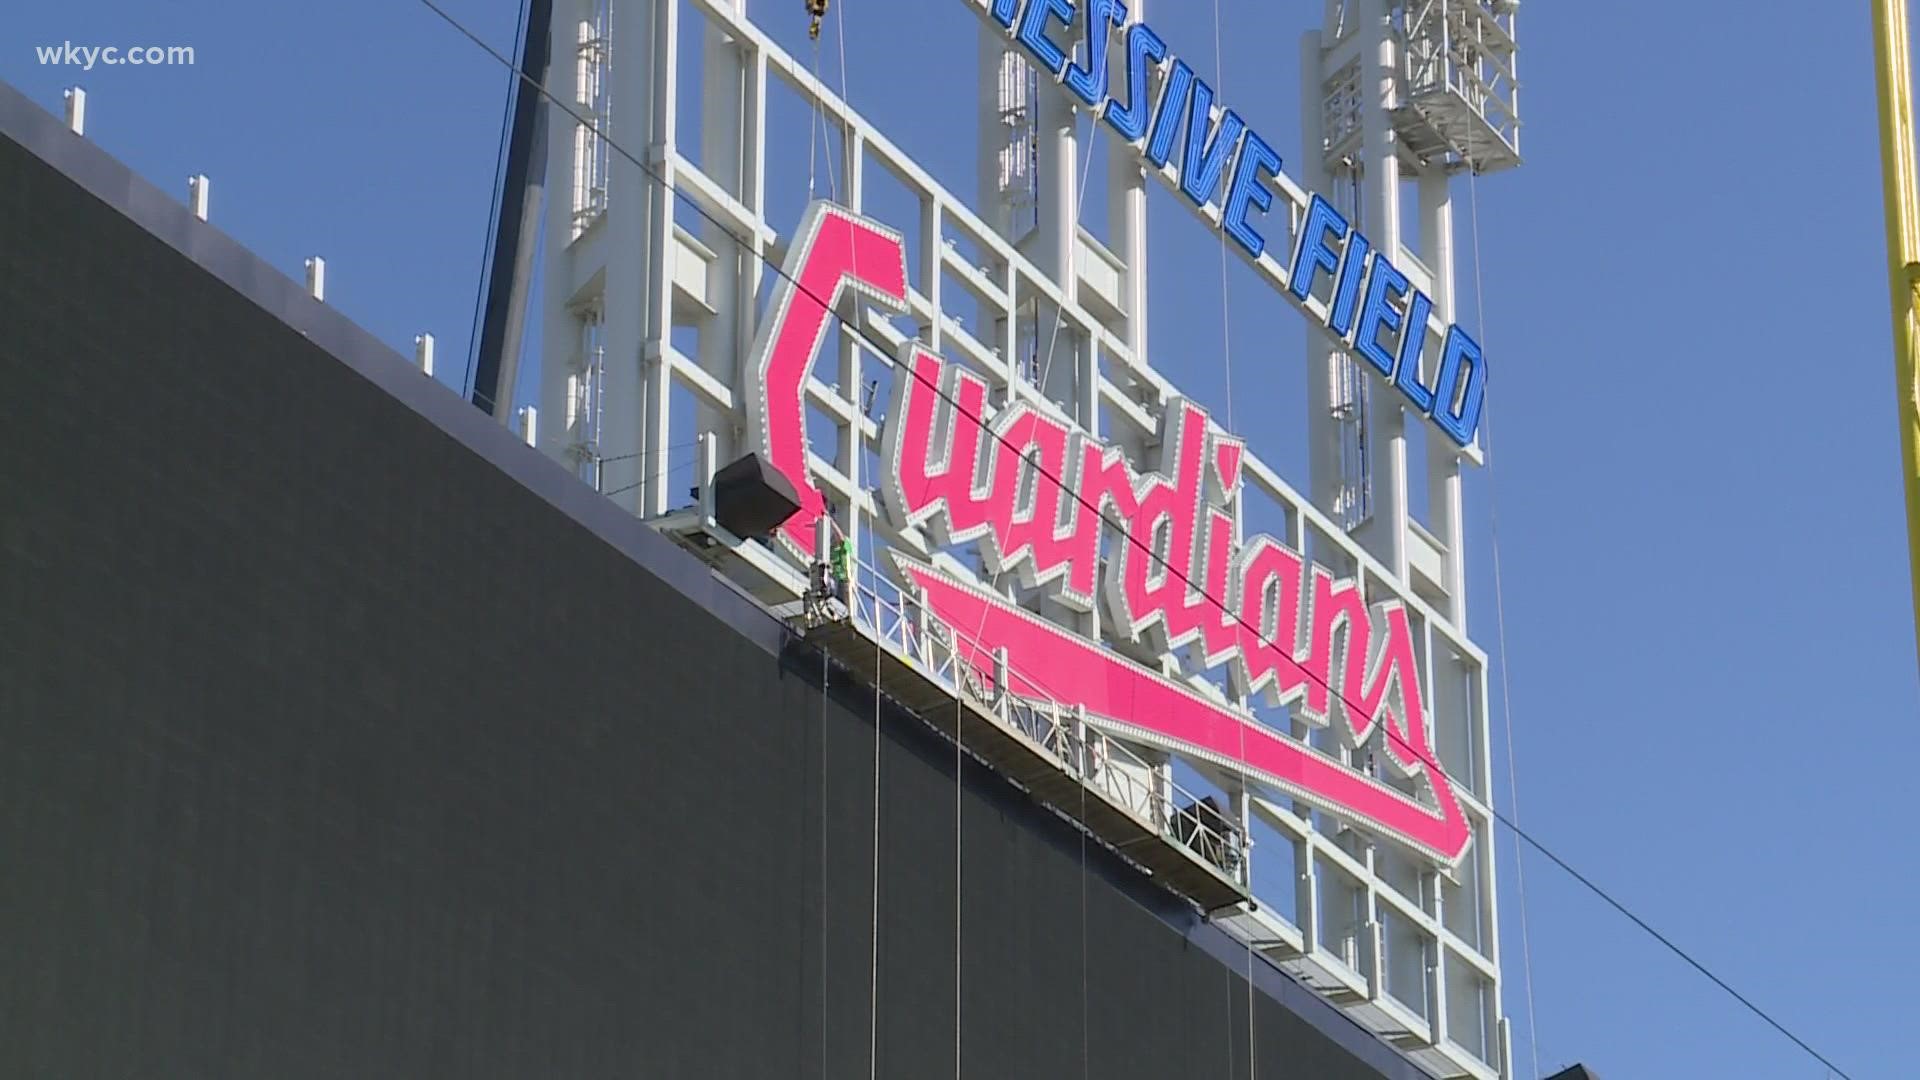 Crews are finishing the installation of the new Cleveland Guardians script sign at Progressive Field.